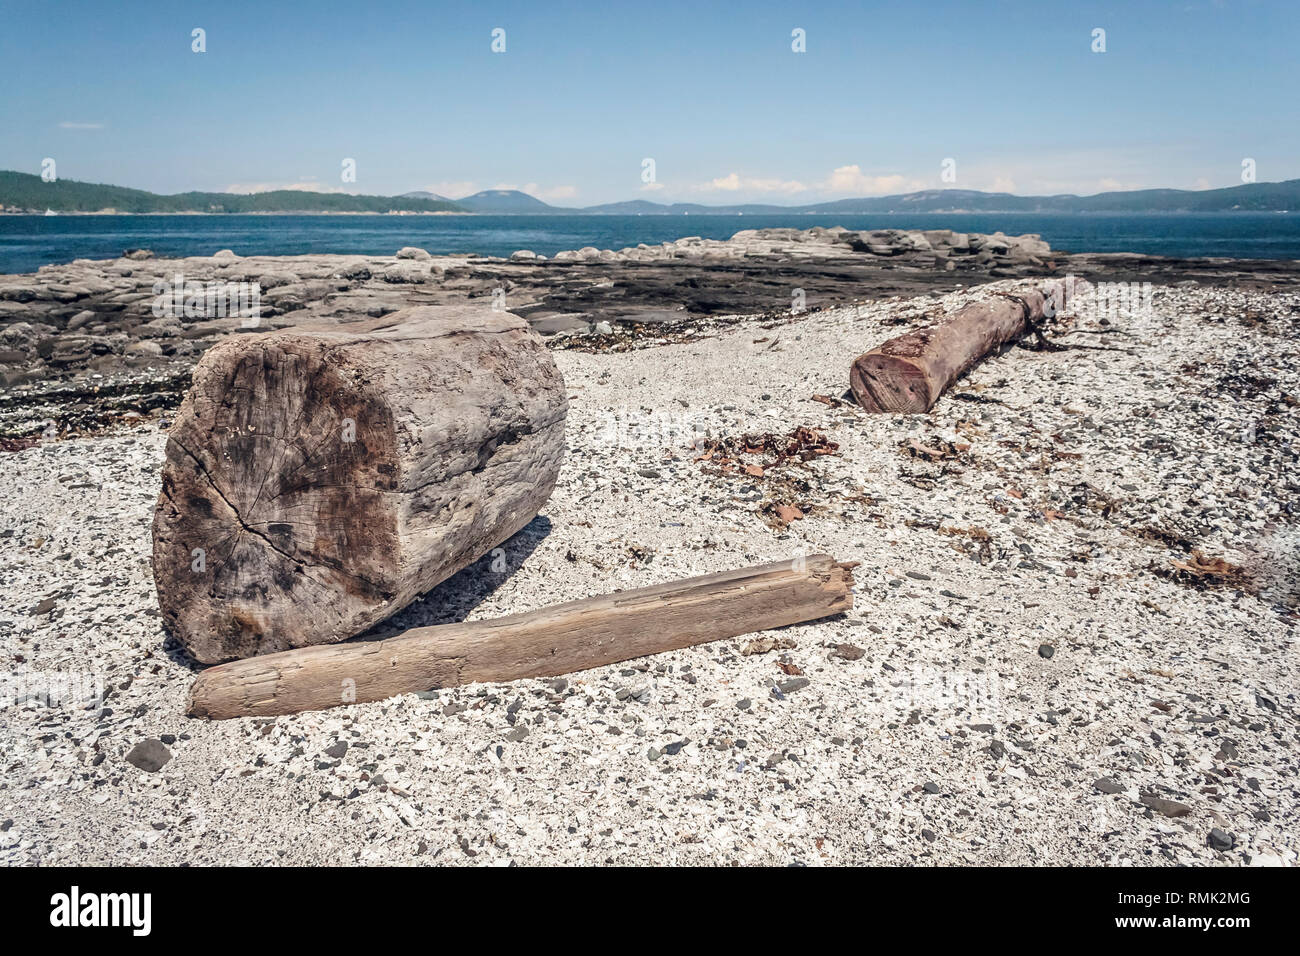 A beach shows ancient and modern human impacts: shell middens from millennia of Coast Salish use and drift logs from recent logging (Gulf Islands BC). Stock Photo